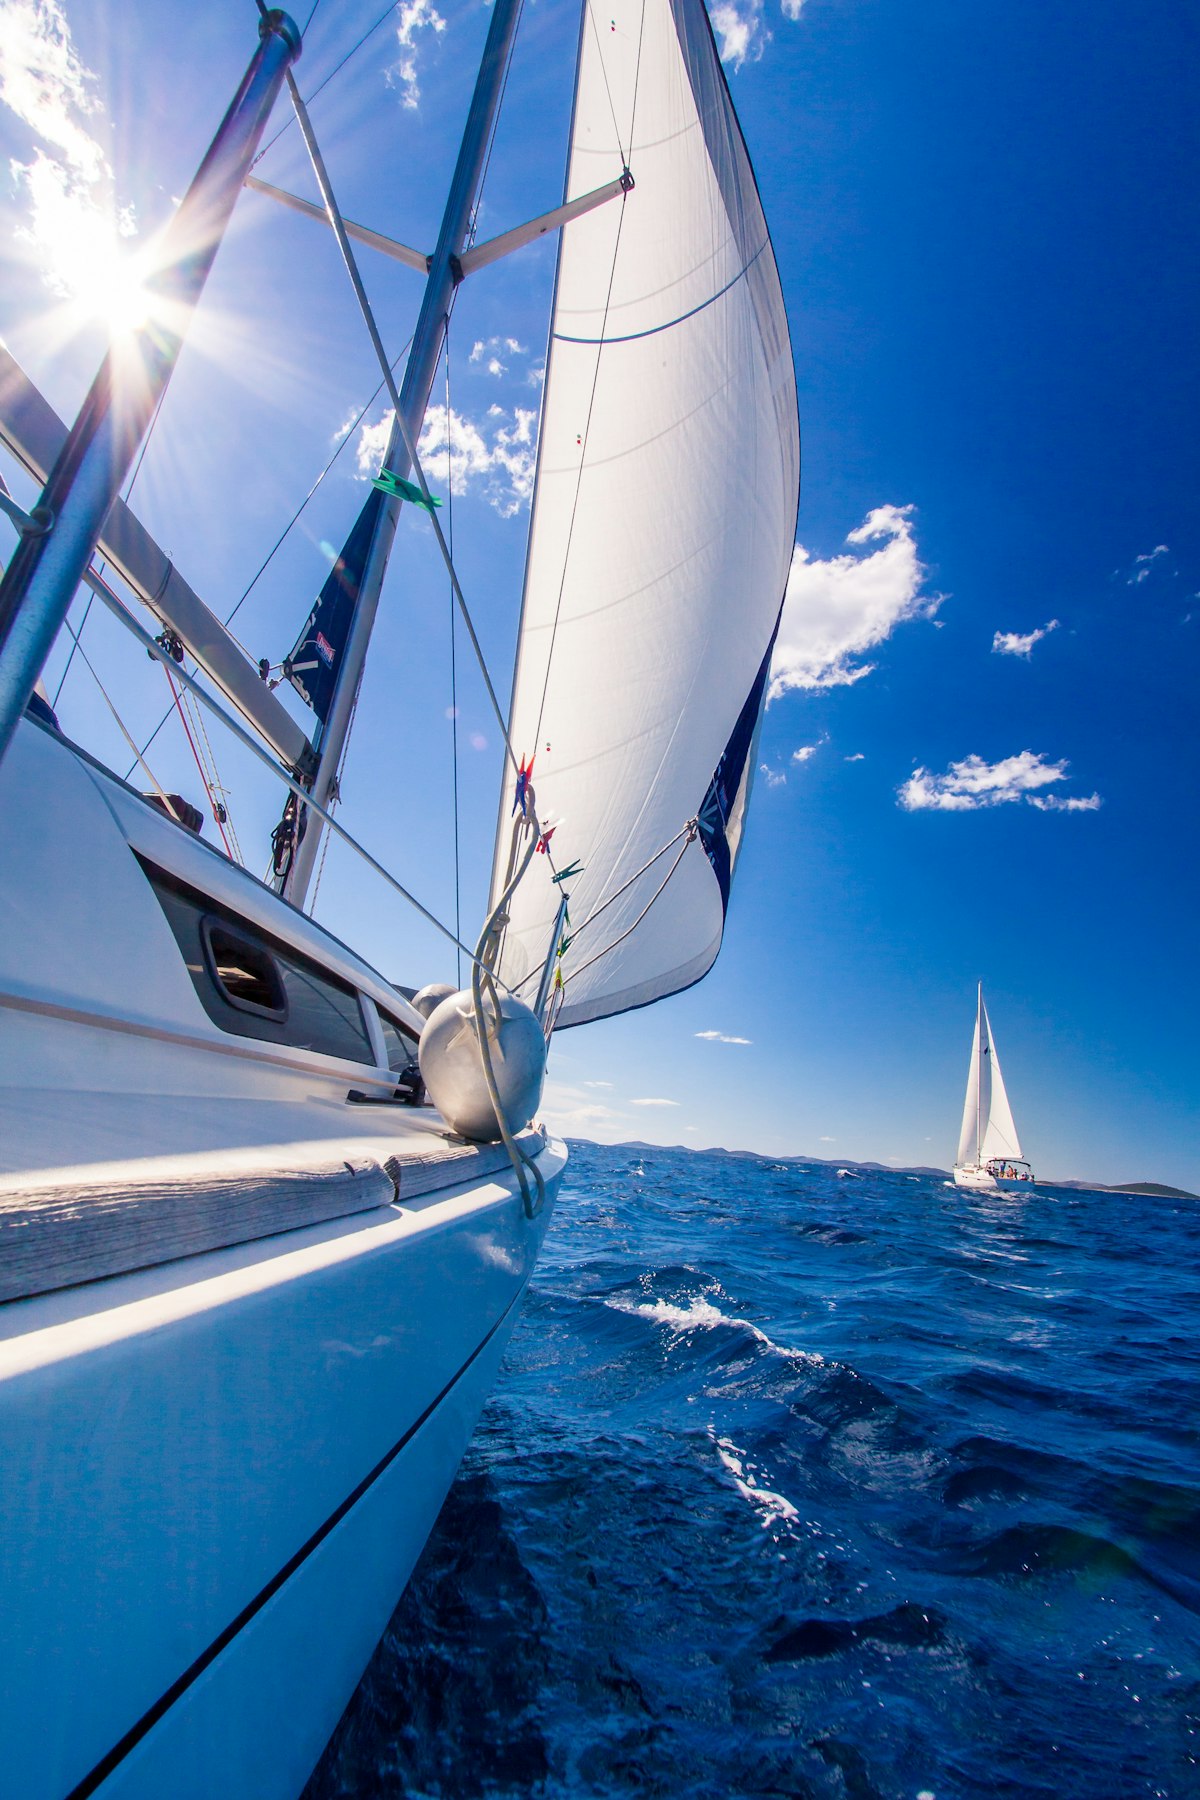 New Year's resolution: let's sail more eco